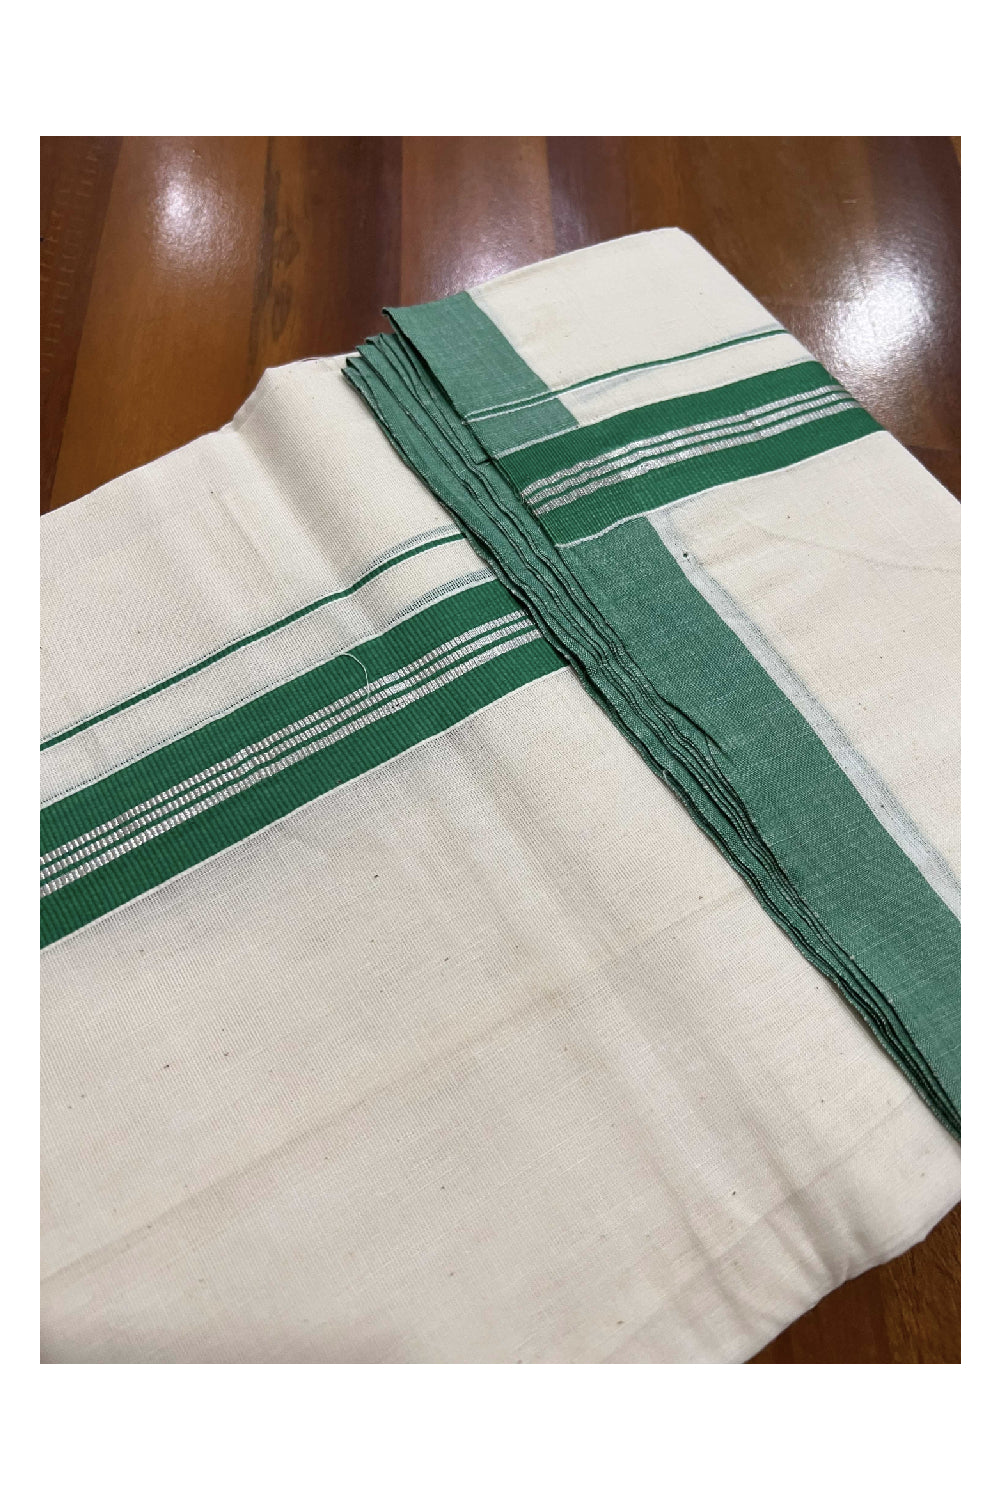 Off White Cotton Mundu with Green and Silver Kasavu Border (South Indian Dhoti)